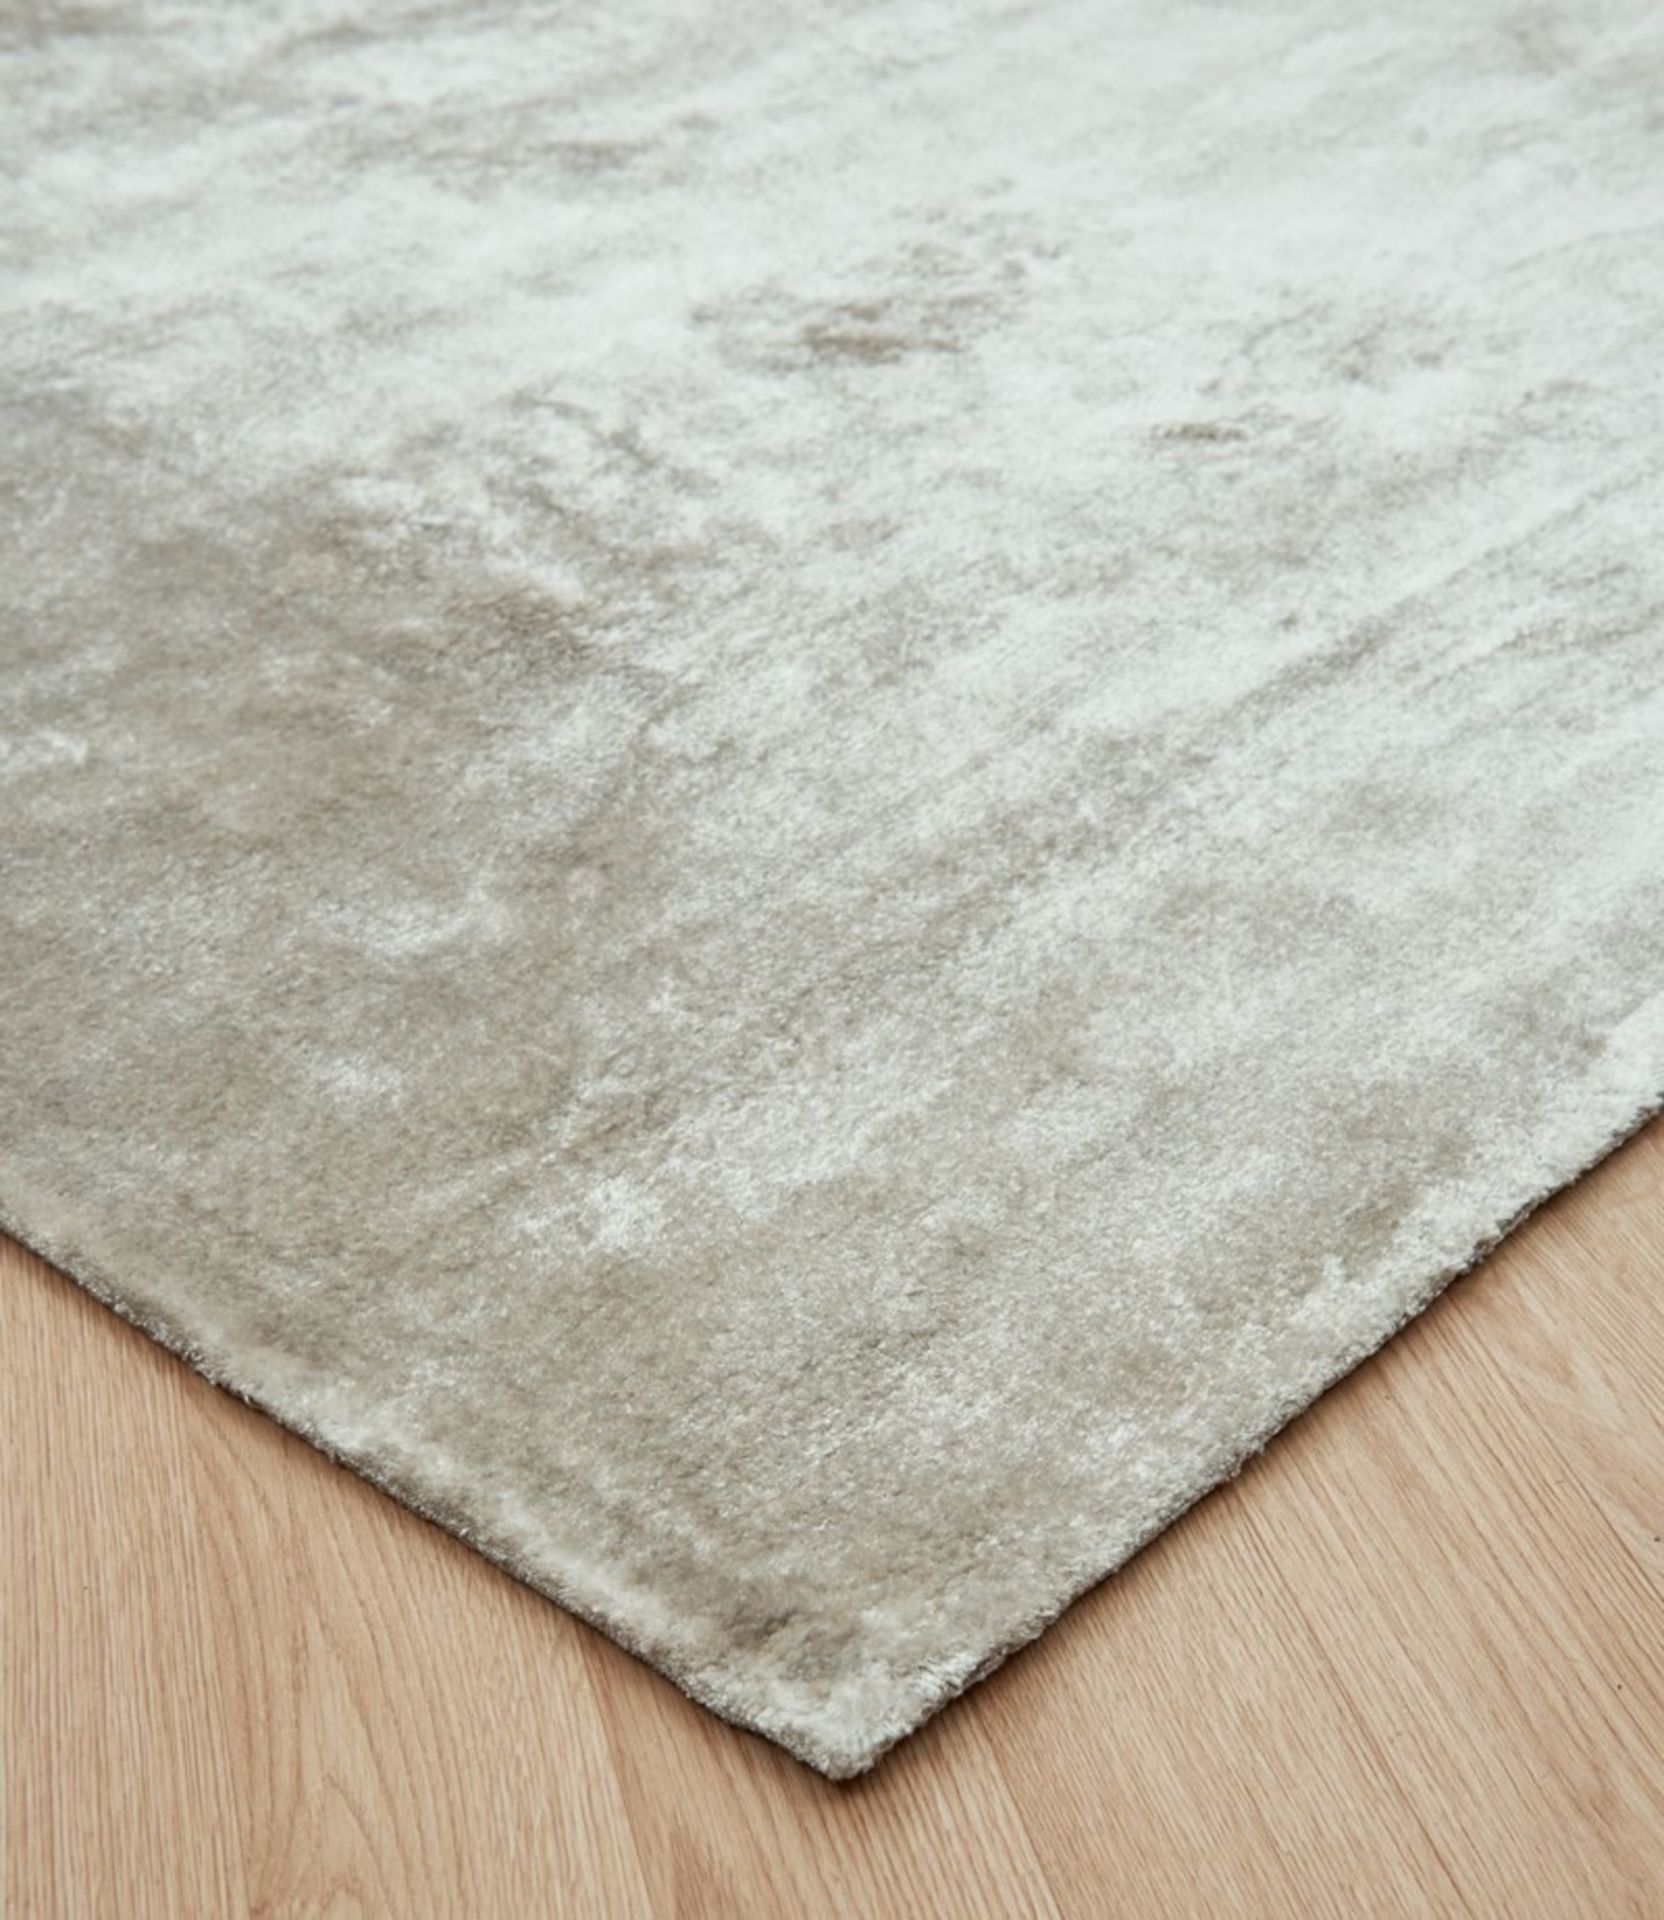 1 x Asiatic 'Dolce' Luxurious Hand-woven Rug In Silver - Handmade in India - 120x180cm - RRP £339.99 - Image 2 of 3